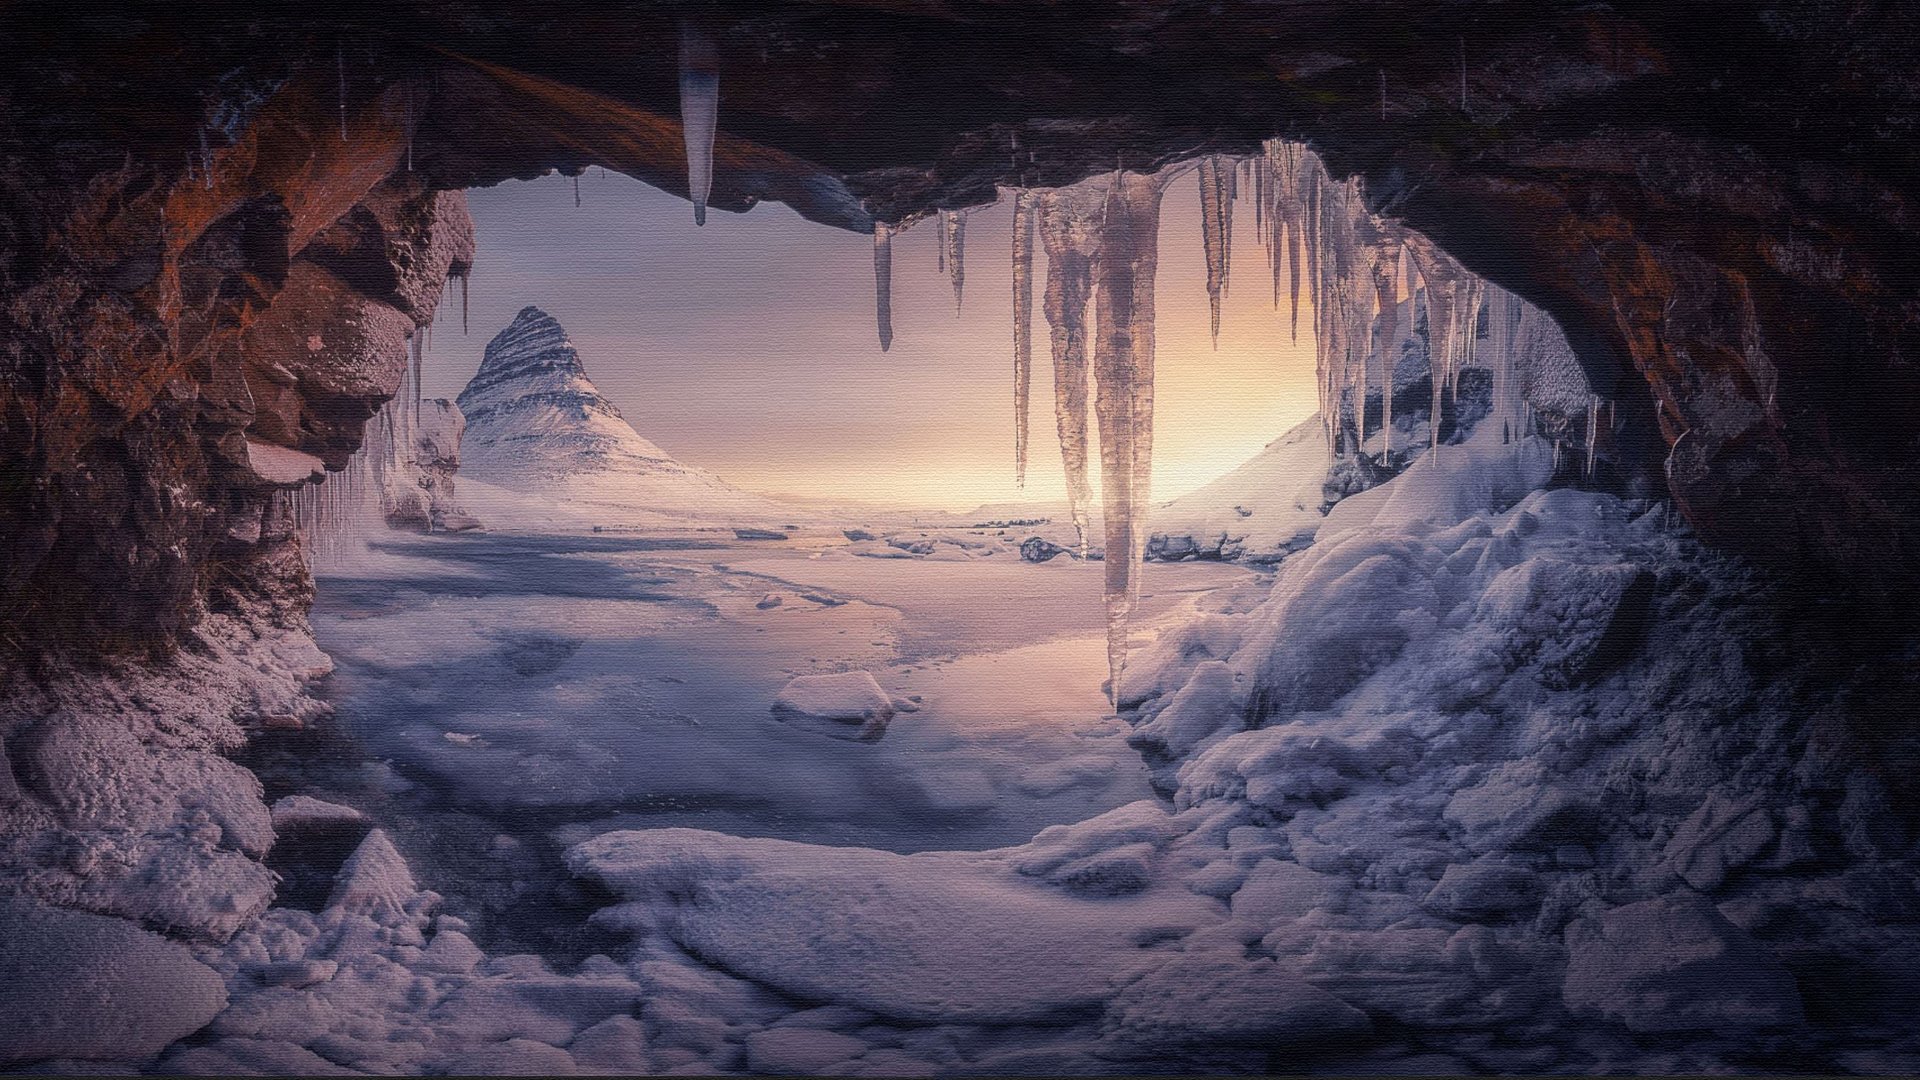 Icy Cave Iceland Print On Canvas 4k Ultra Hd Wallpaper Background